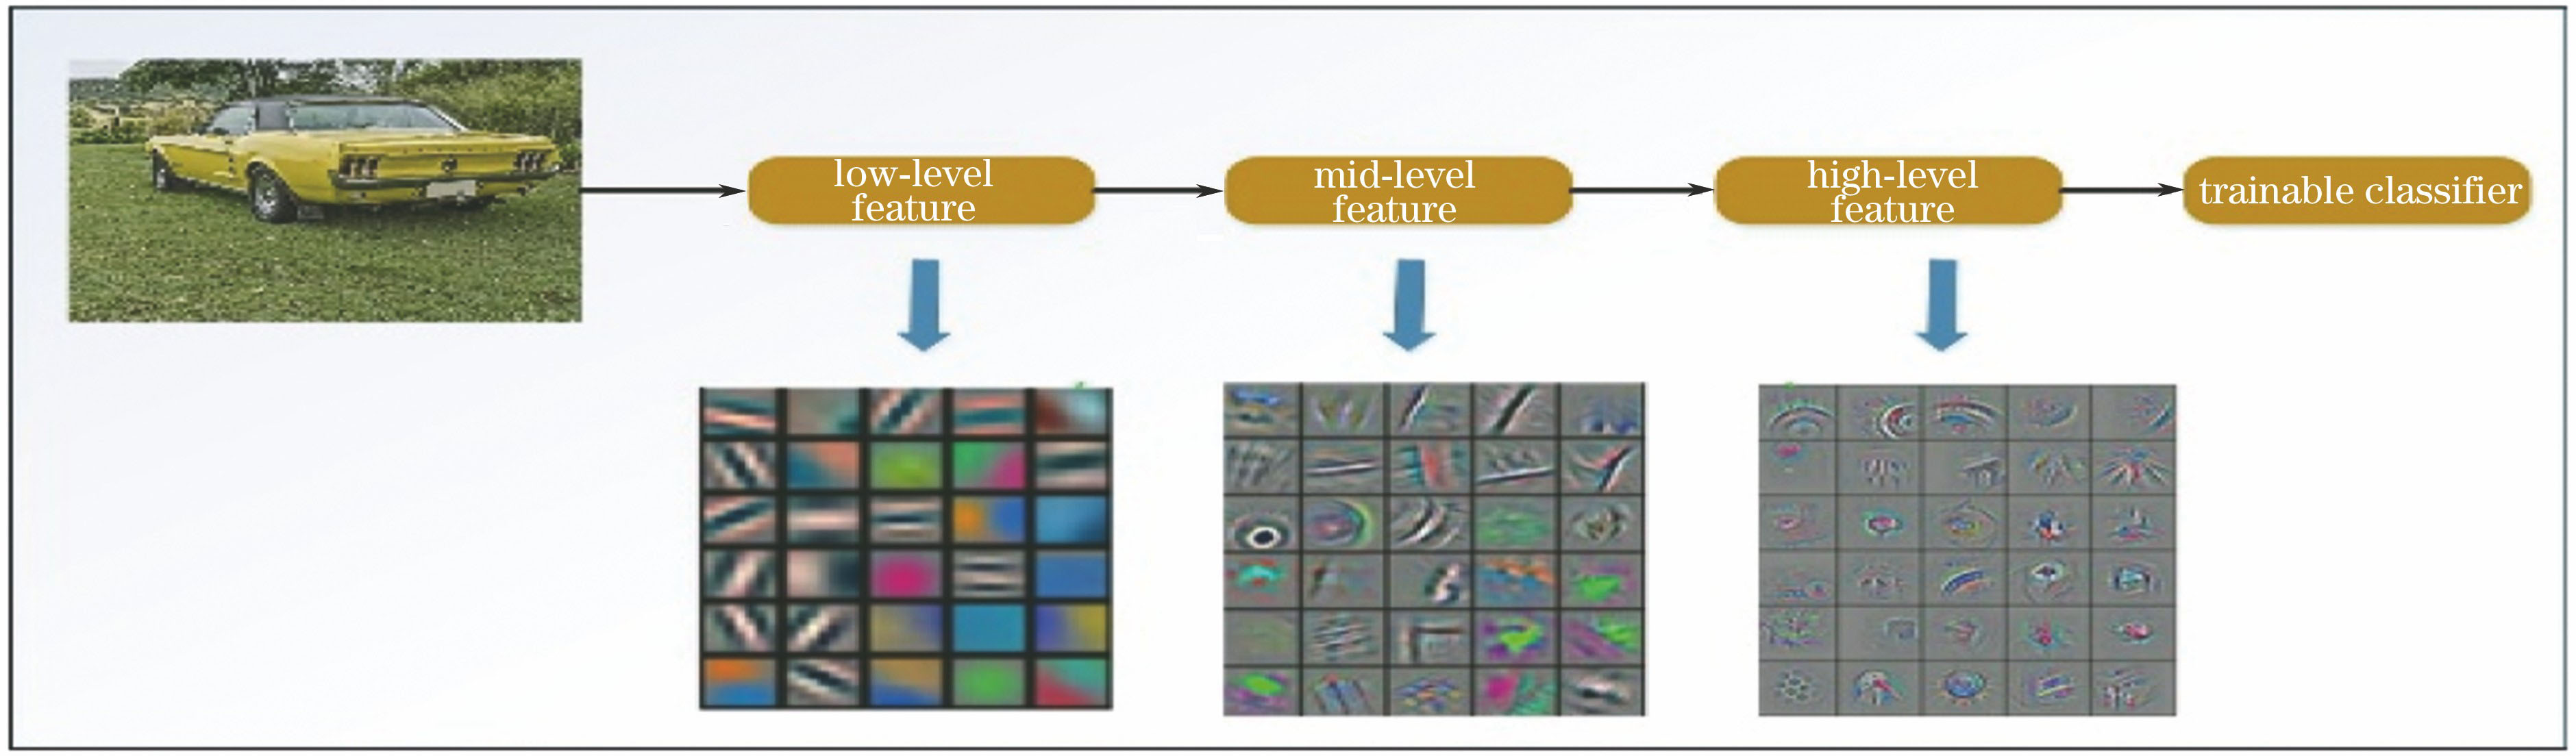 Example of CNN model extracting feature convolution kernels at various levels